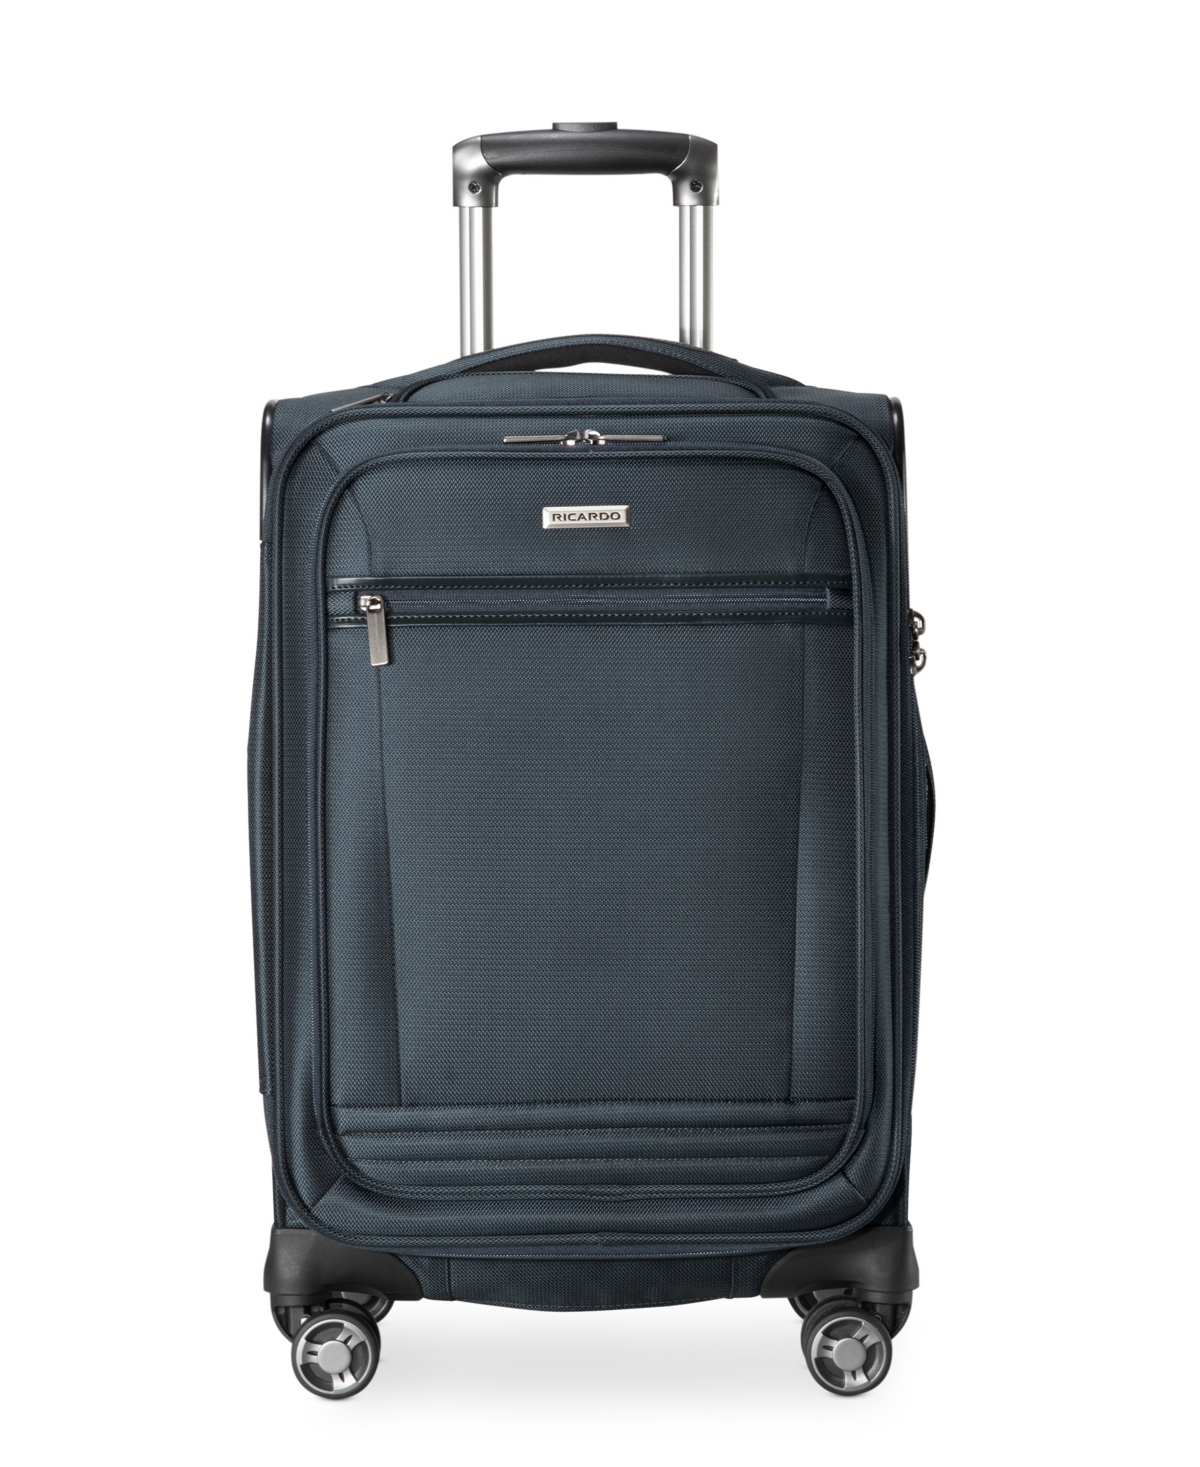 Ricardo Avalon Softside 20" Carry-on Spinner Suitcase In Storm Blue